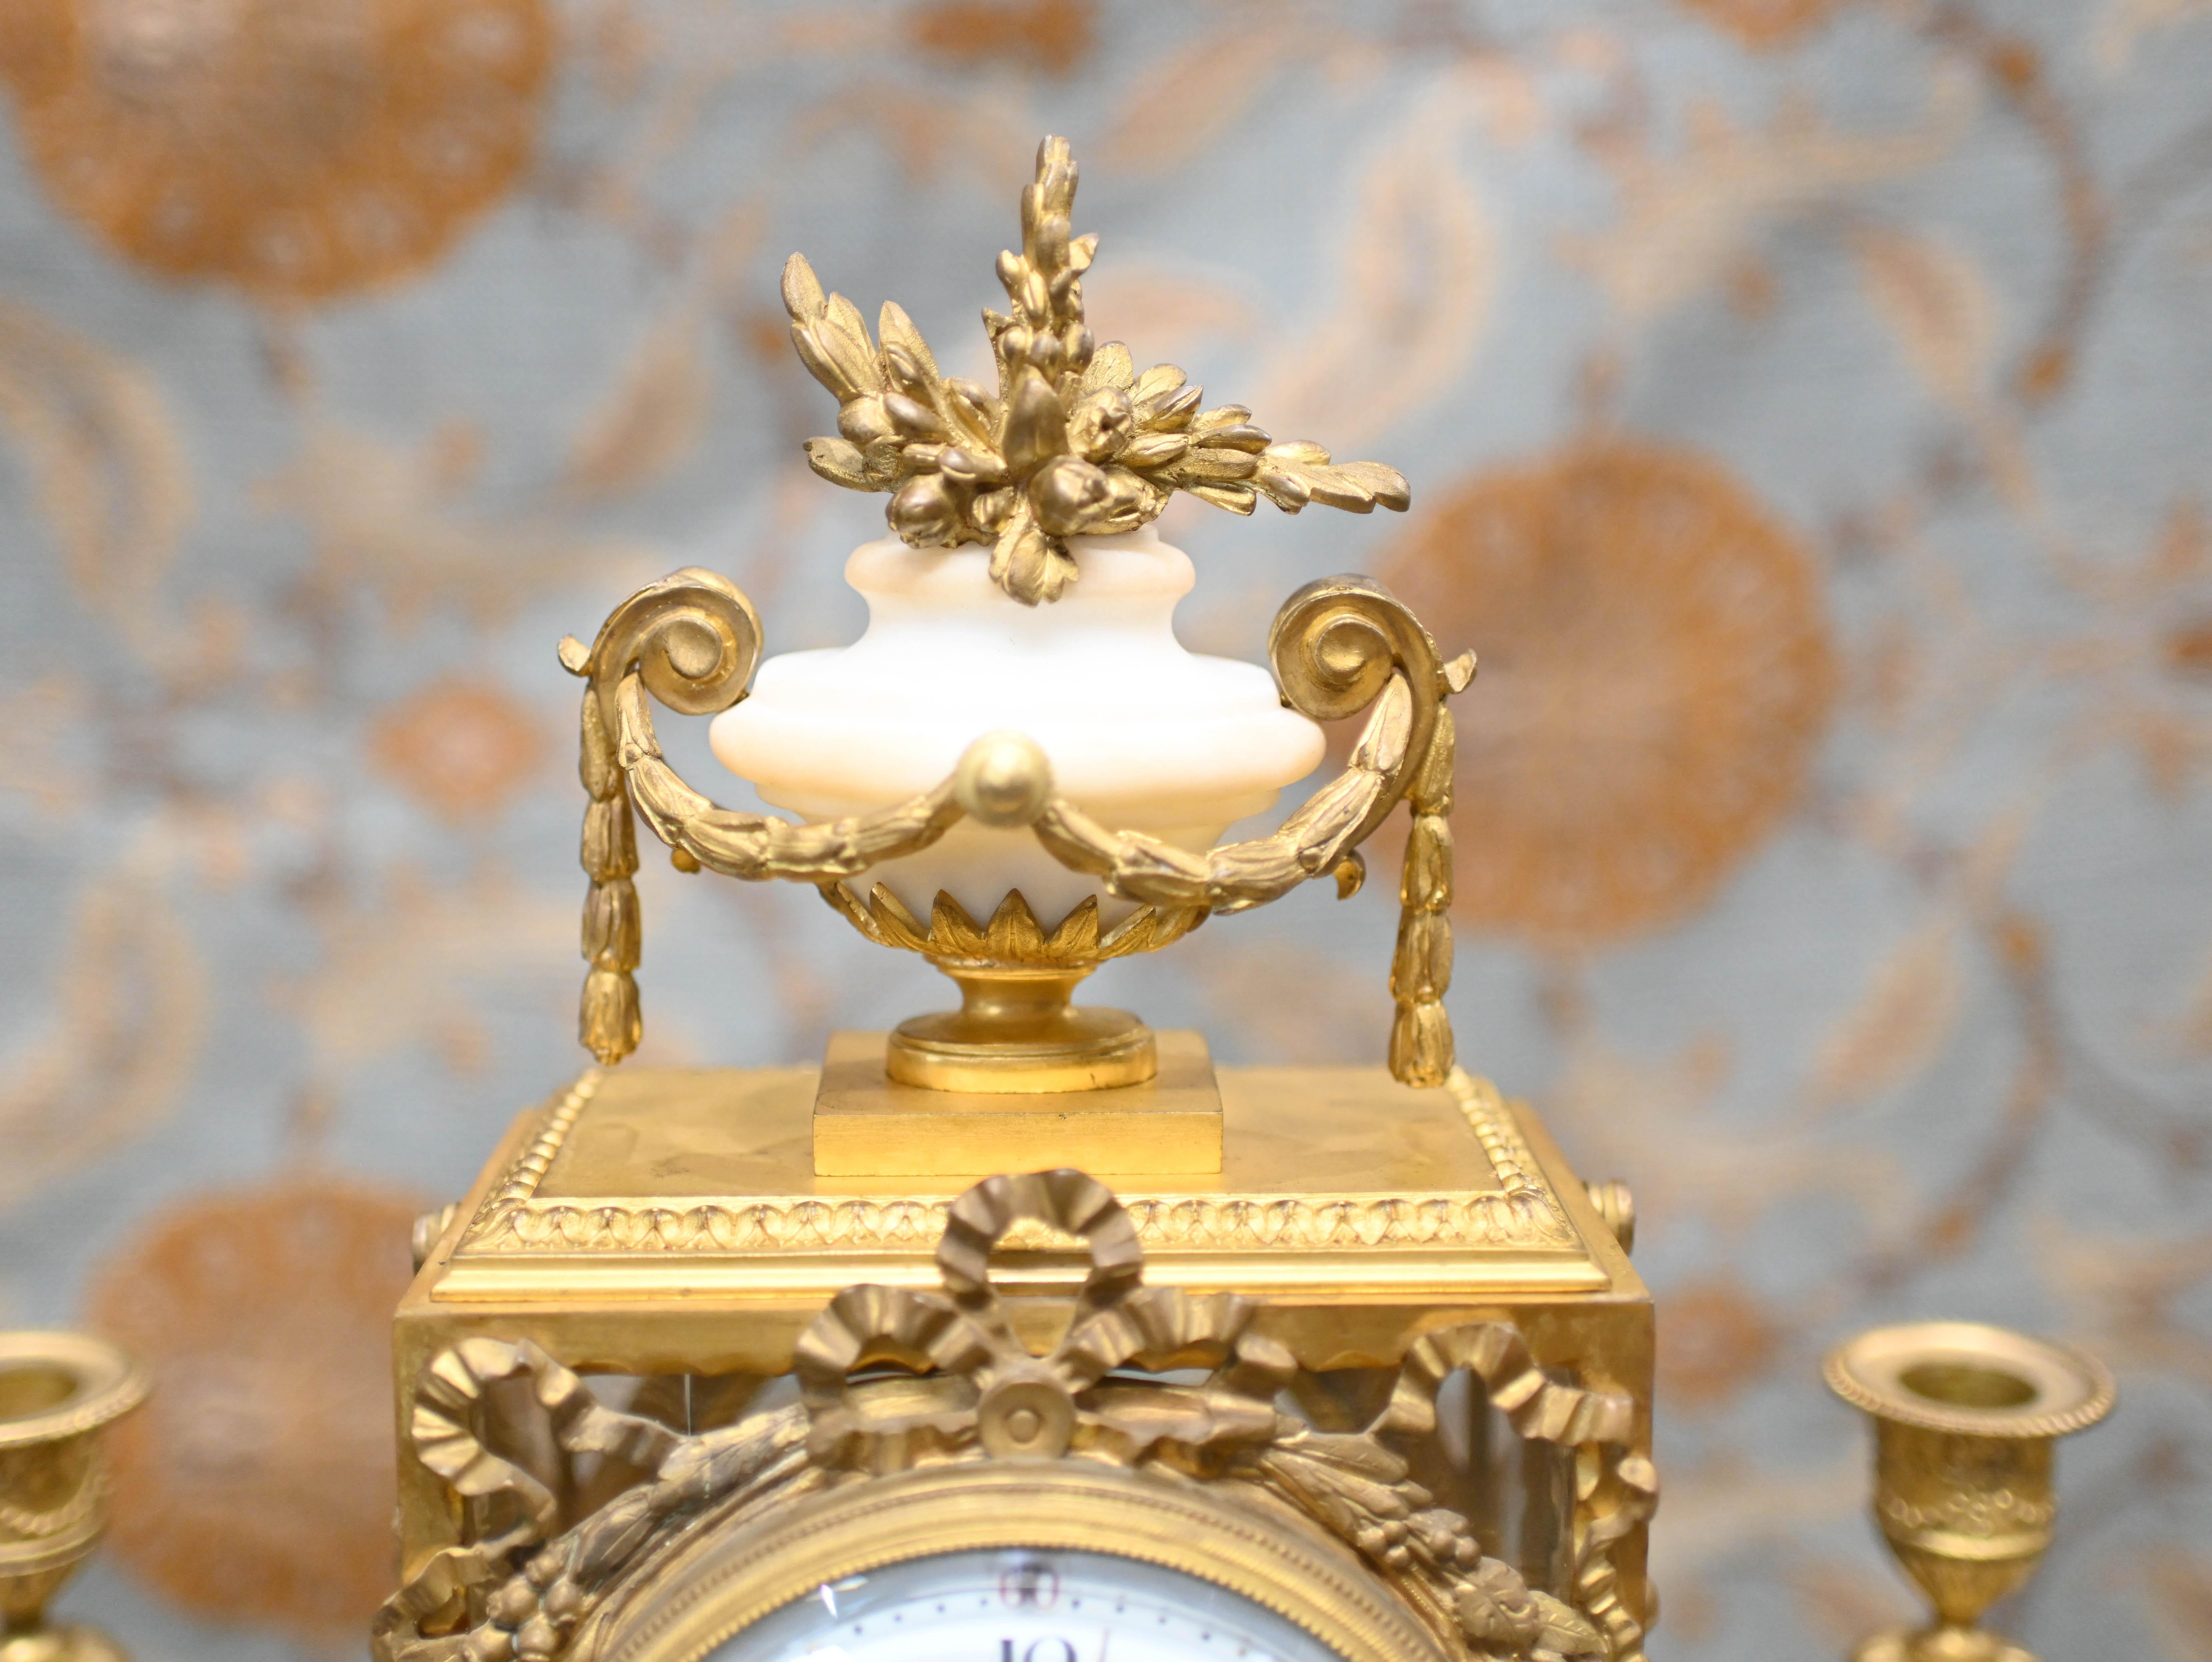 Wonderful French antique clock set with garniture
Classic mantle clock crafted from gilt and marble
The clock has a chiming mechanism which chimes on the hour 
Hopefully the photos illustrate the details to the gilt very ornate and well cast
Clock